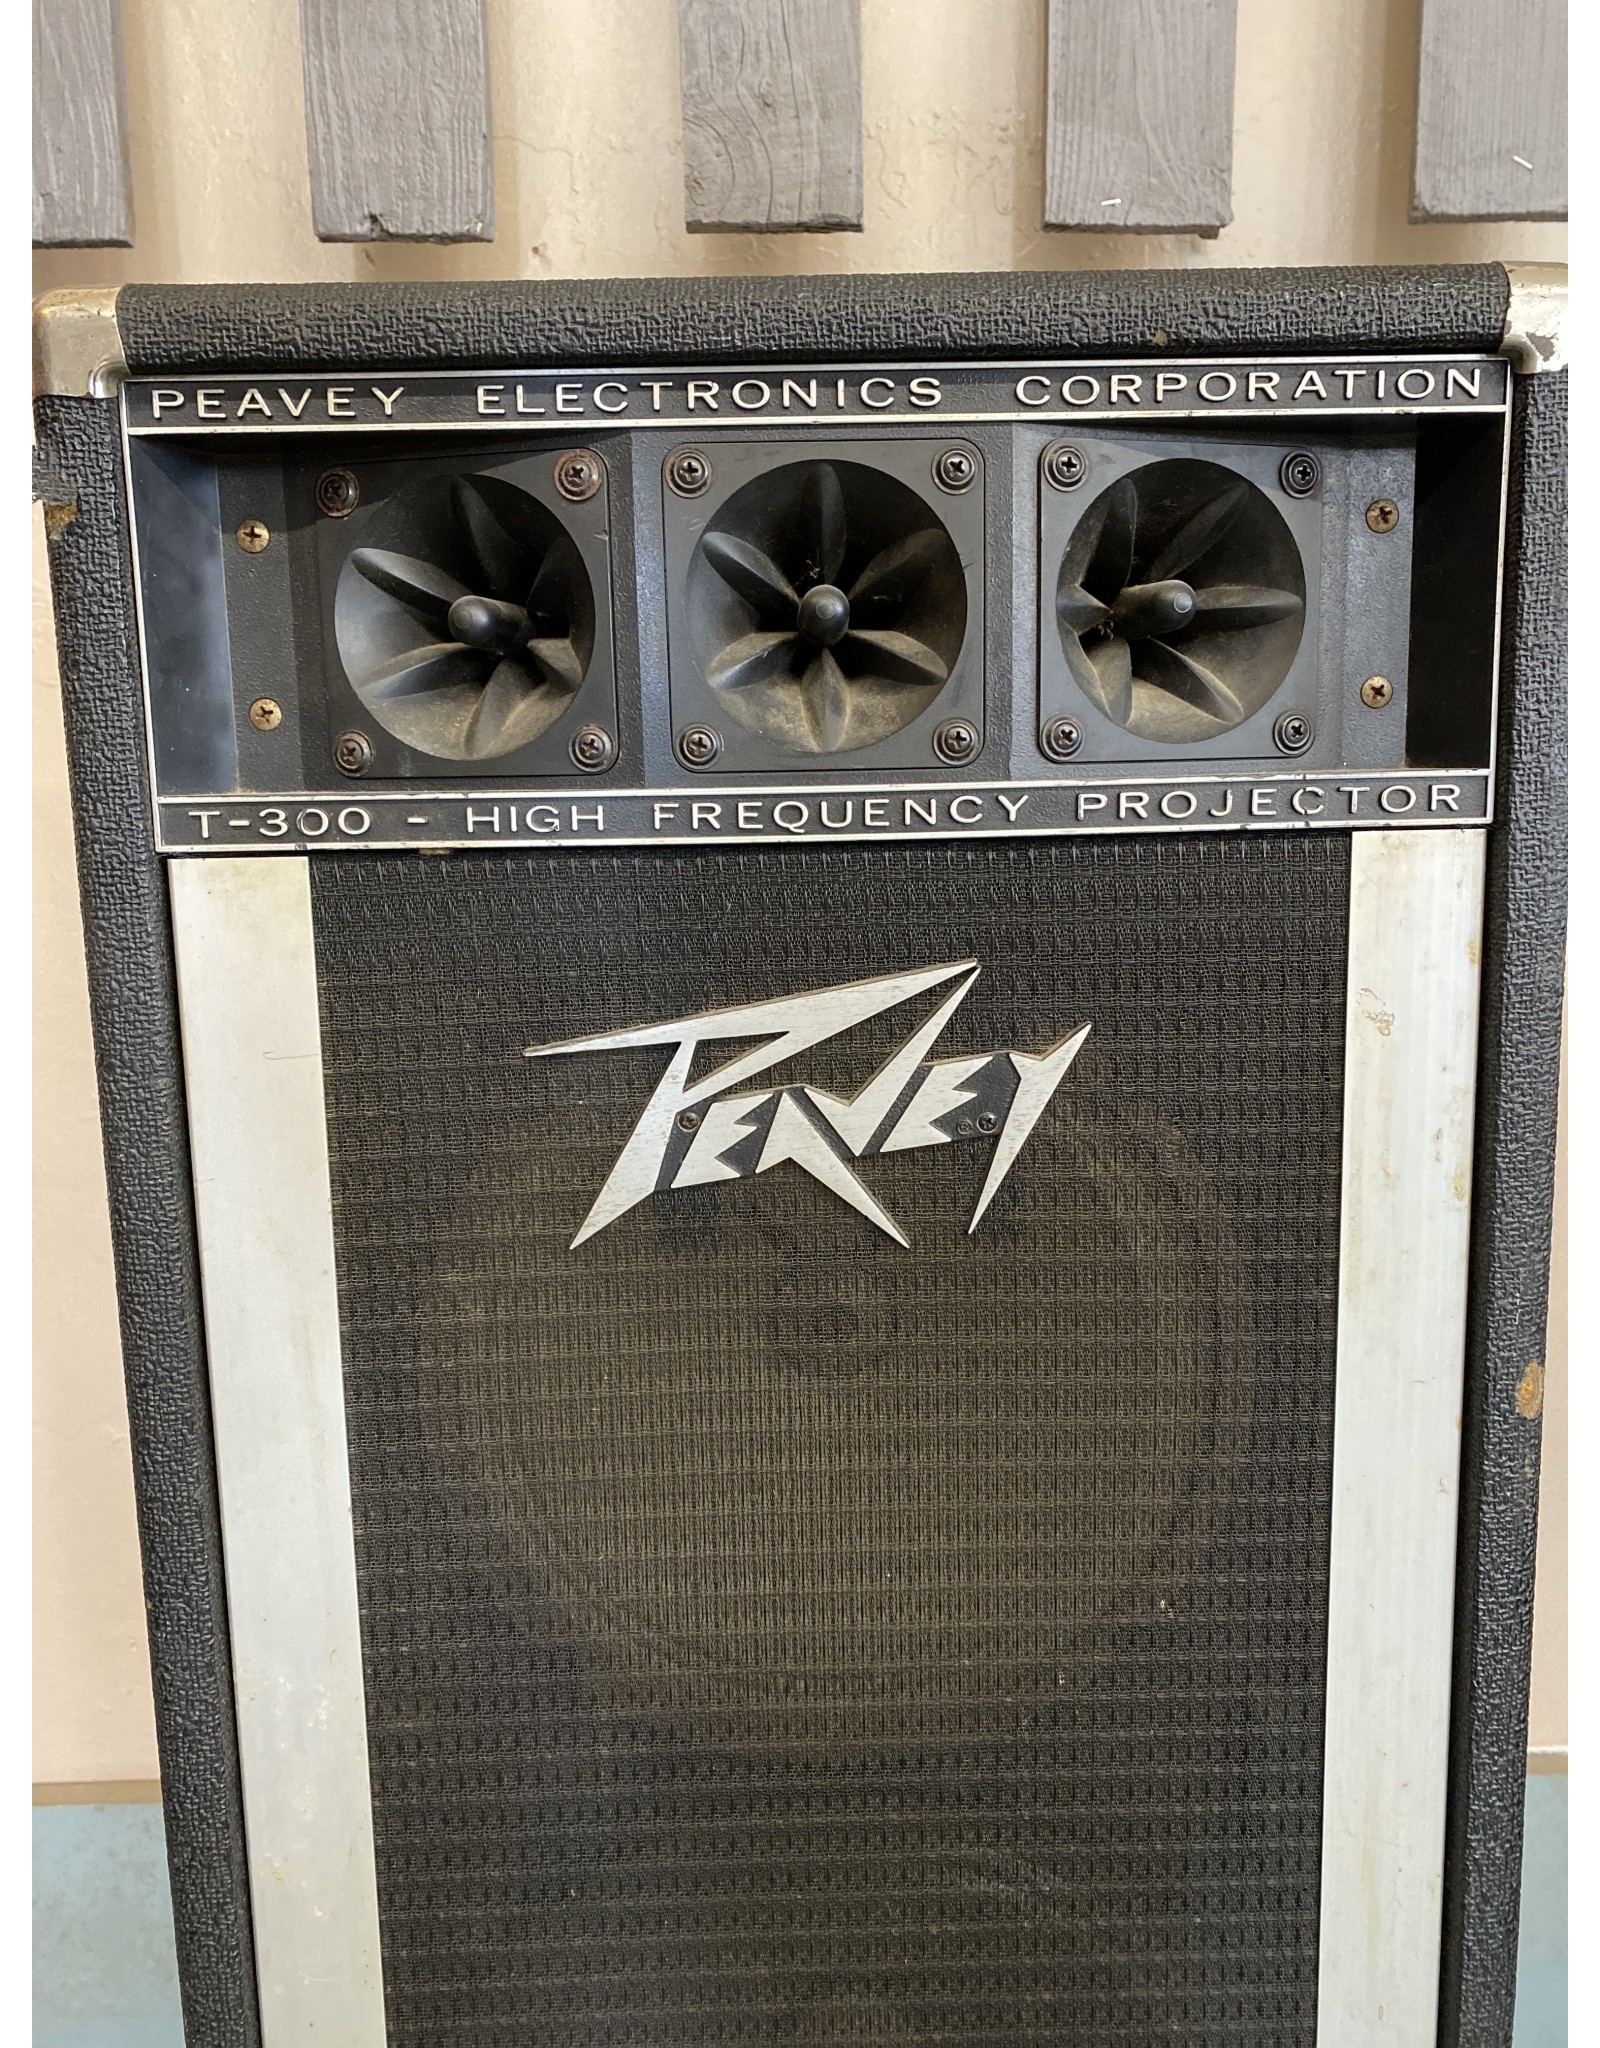 Peavey Peavey T-300 High Frequency Projector (used)